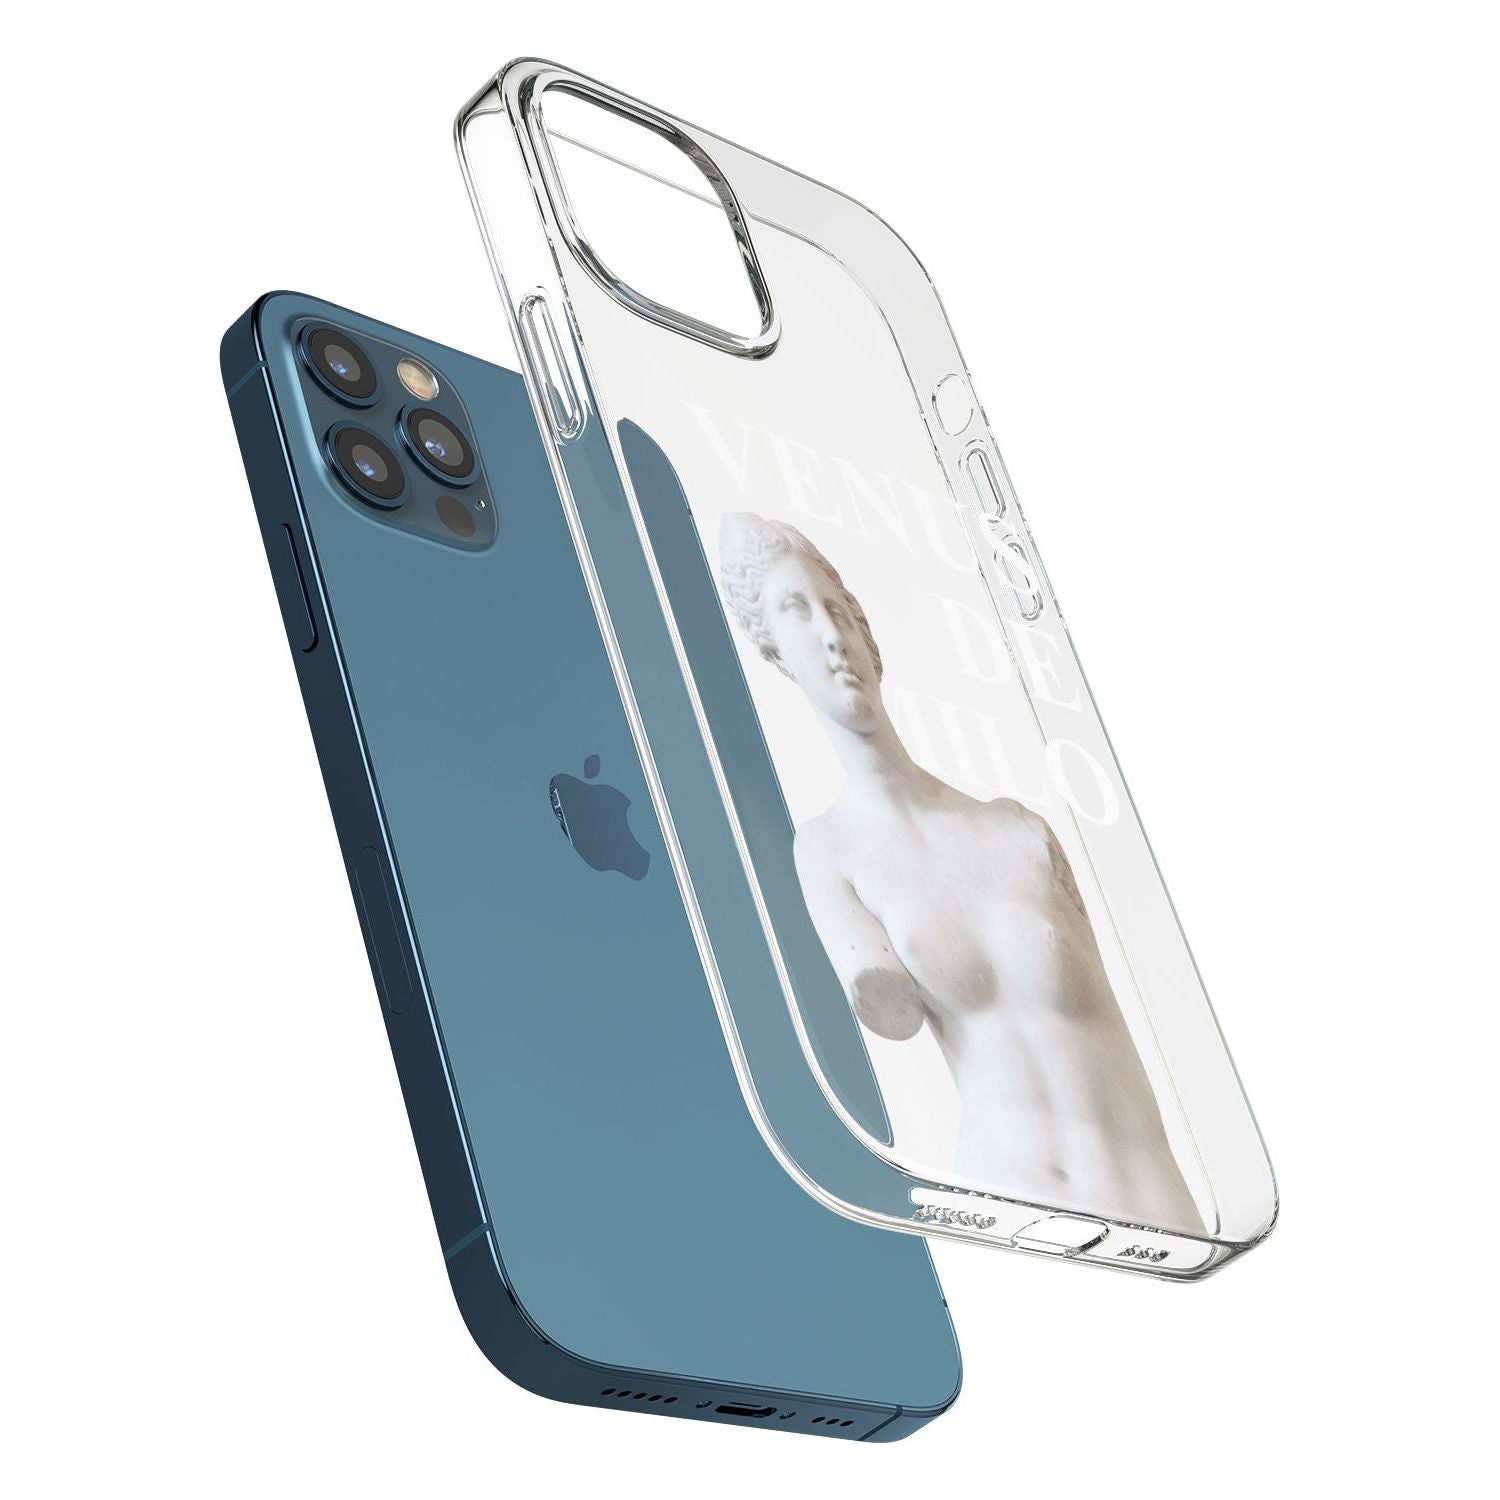 Sidewall Phone Case for iPhone 12 Pro